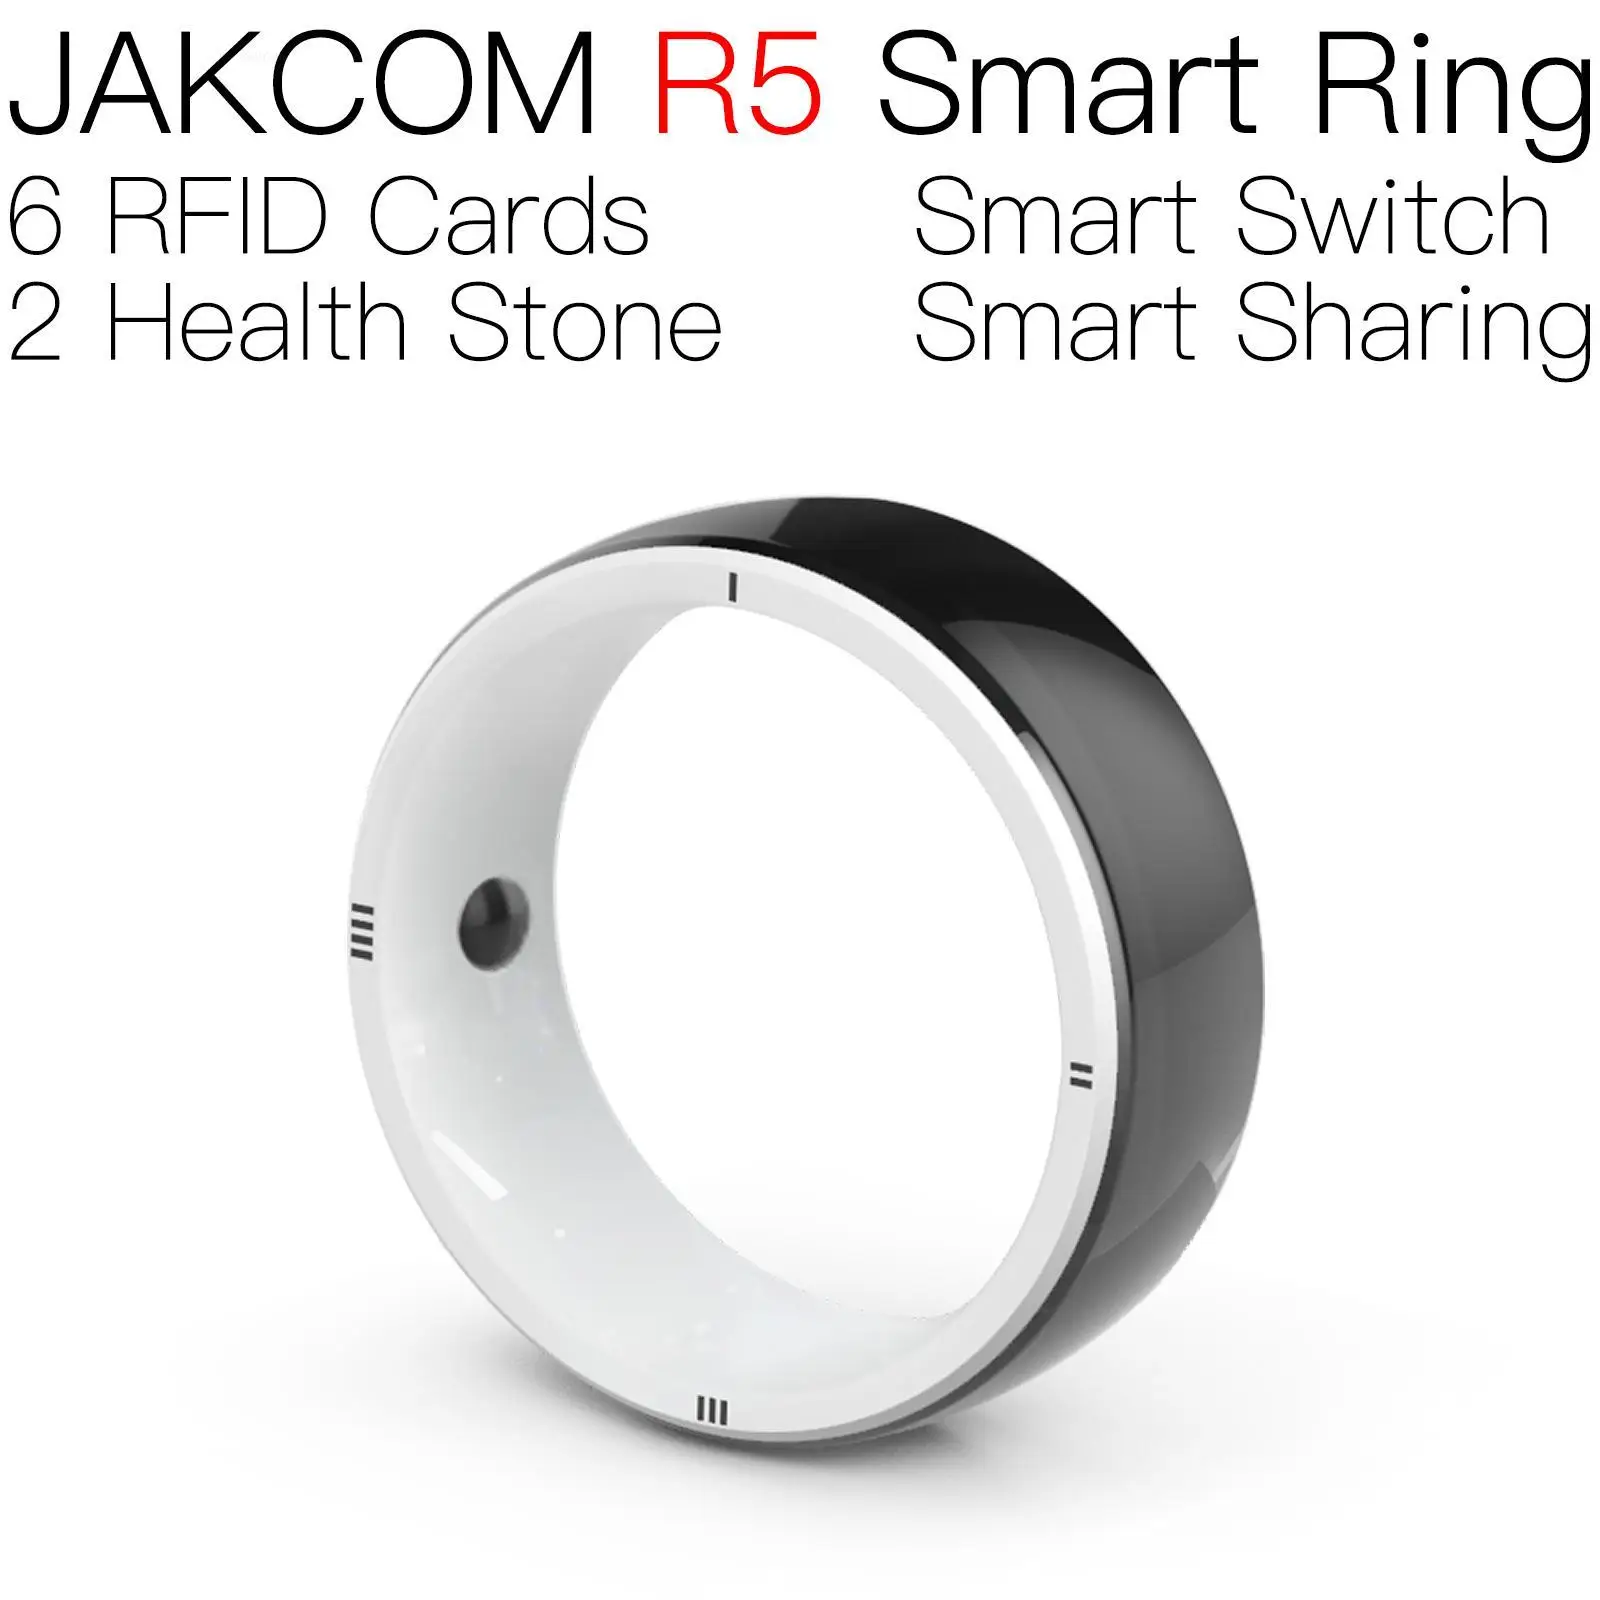 

JAKCOM R5 Smart Ring Newer than dual frequency hf uhf nfc classic 1k s50 and h3 smart card for payment metal customized